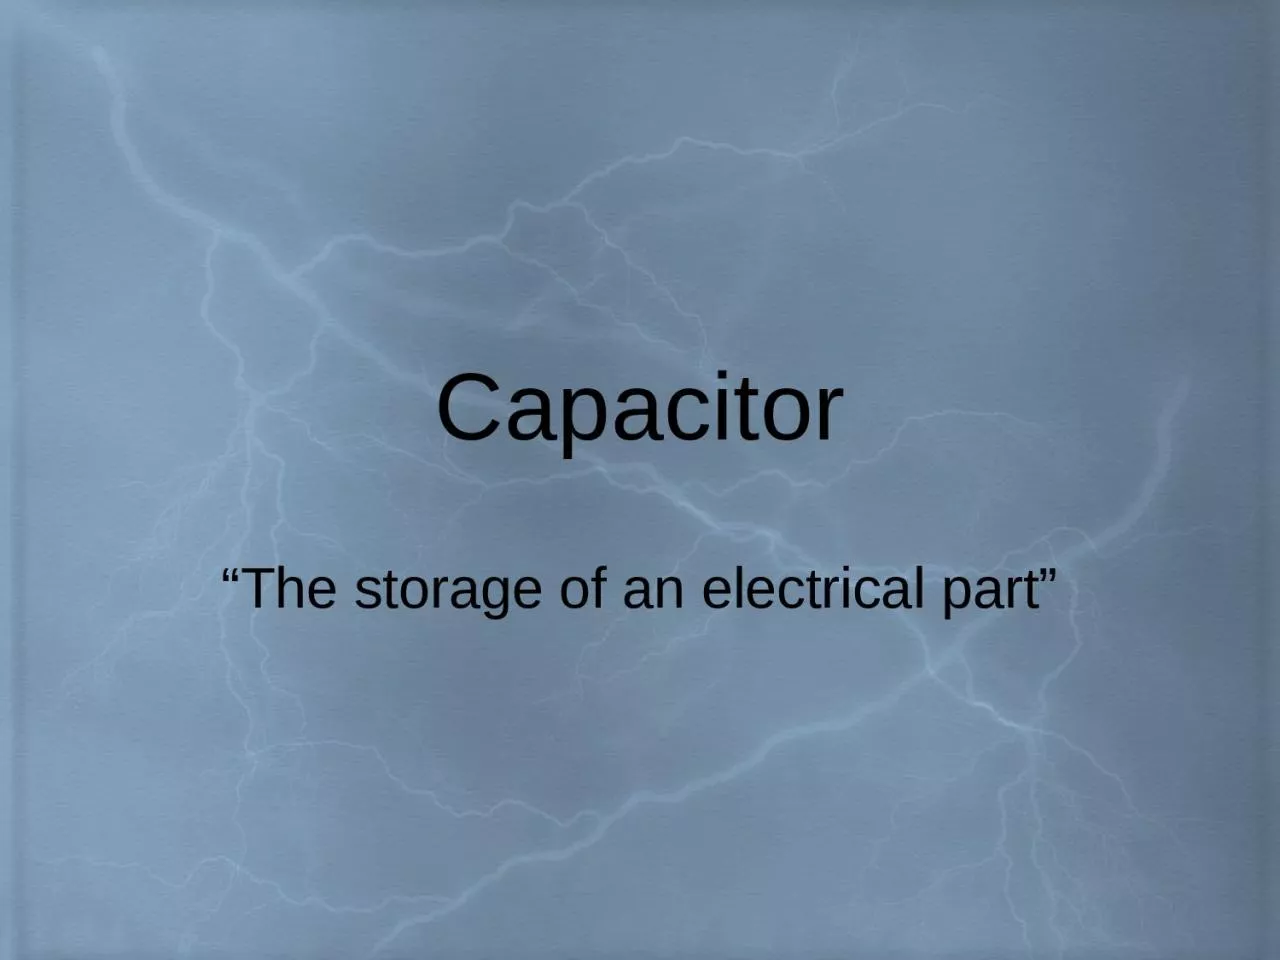 Capacitor “The storage of an electrical part”